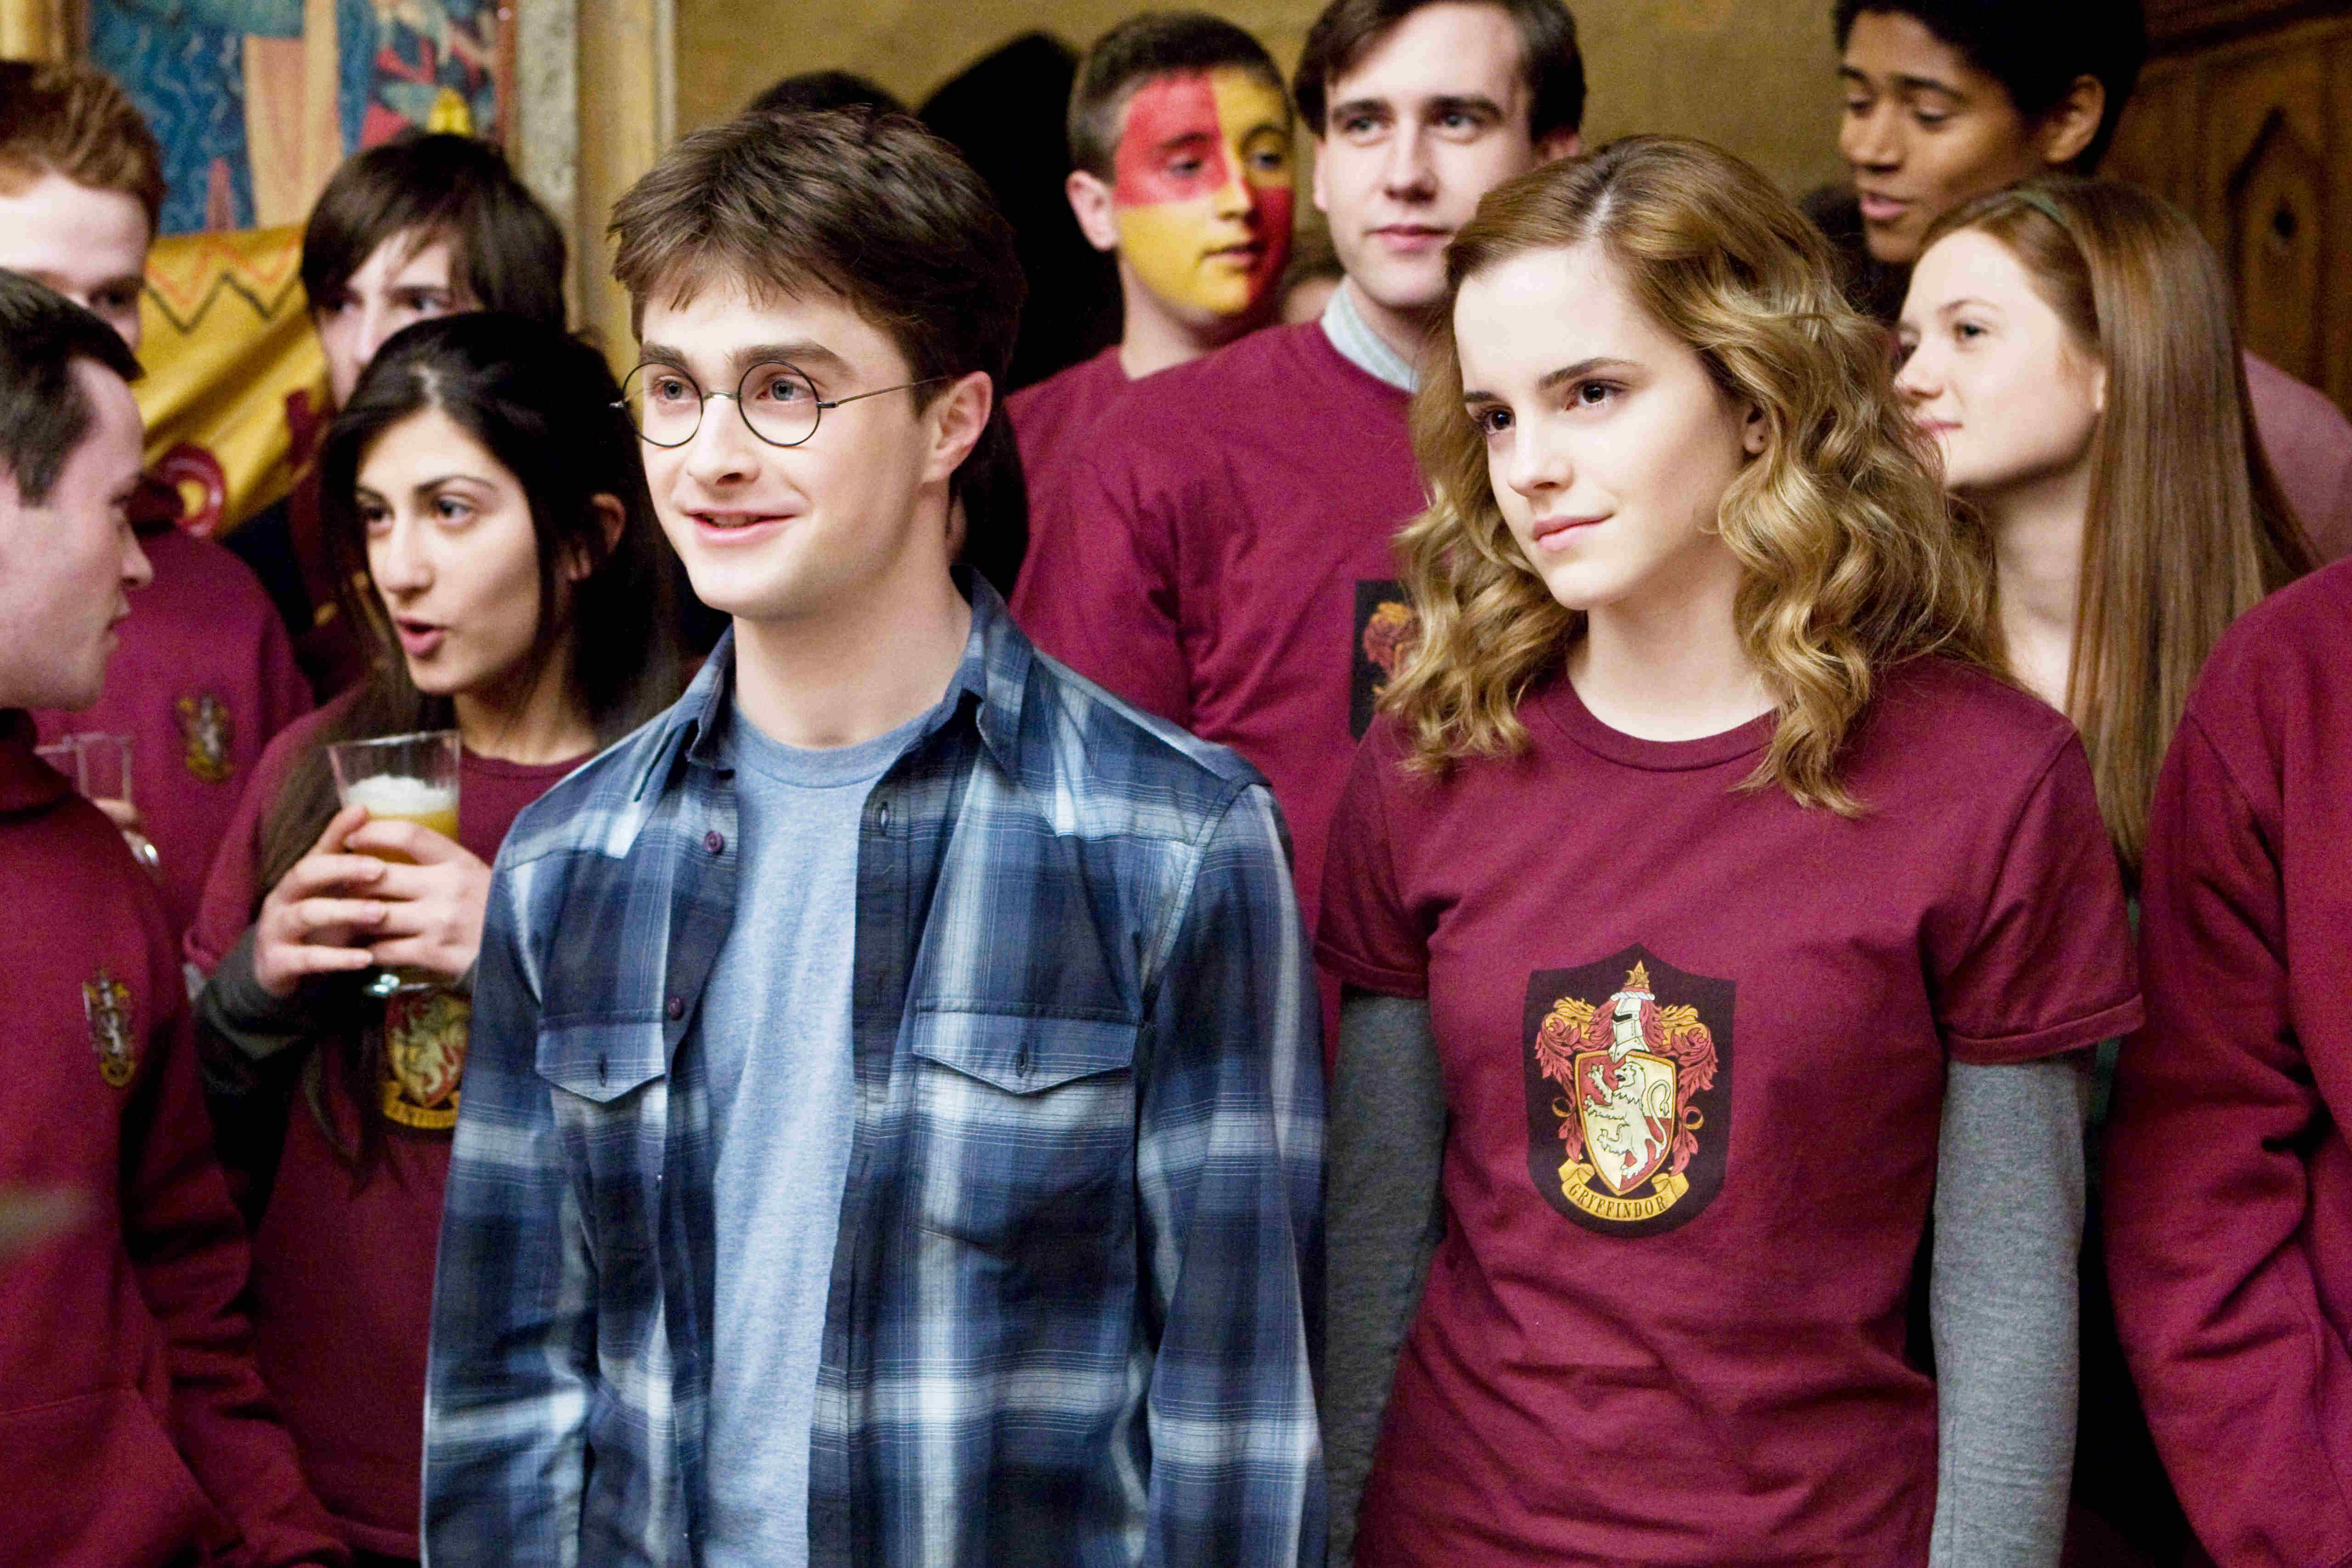 Daniel Radcliffe stars as Harry Potter and Emma Watson stars as Hermione Granger in Warner Bros Pictures' Harry Potter and the Half-Blood Prince (2009)